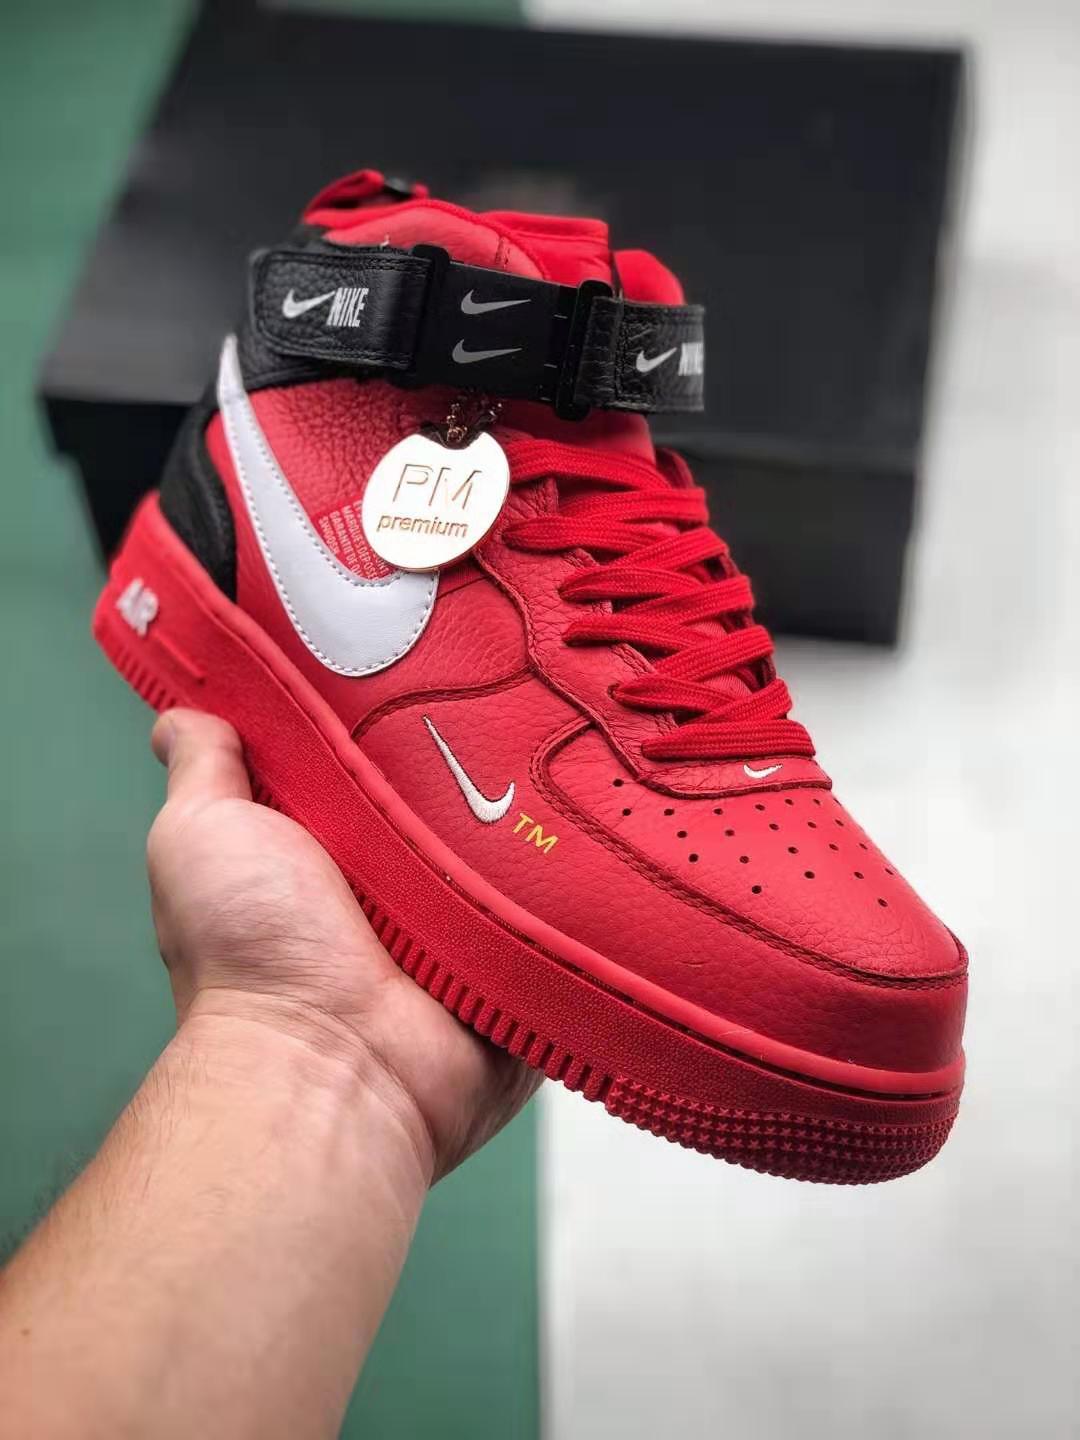 Nike Air Force 1 Mid Utility University Red 804609-605 - Stylish and Functional Nike Sneakers